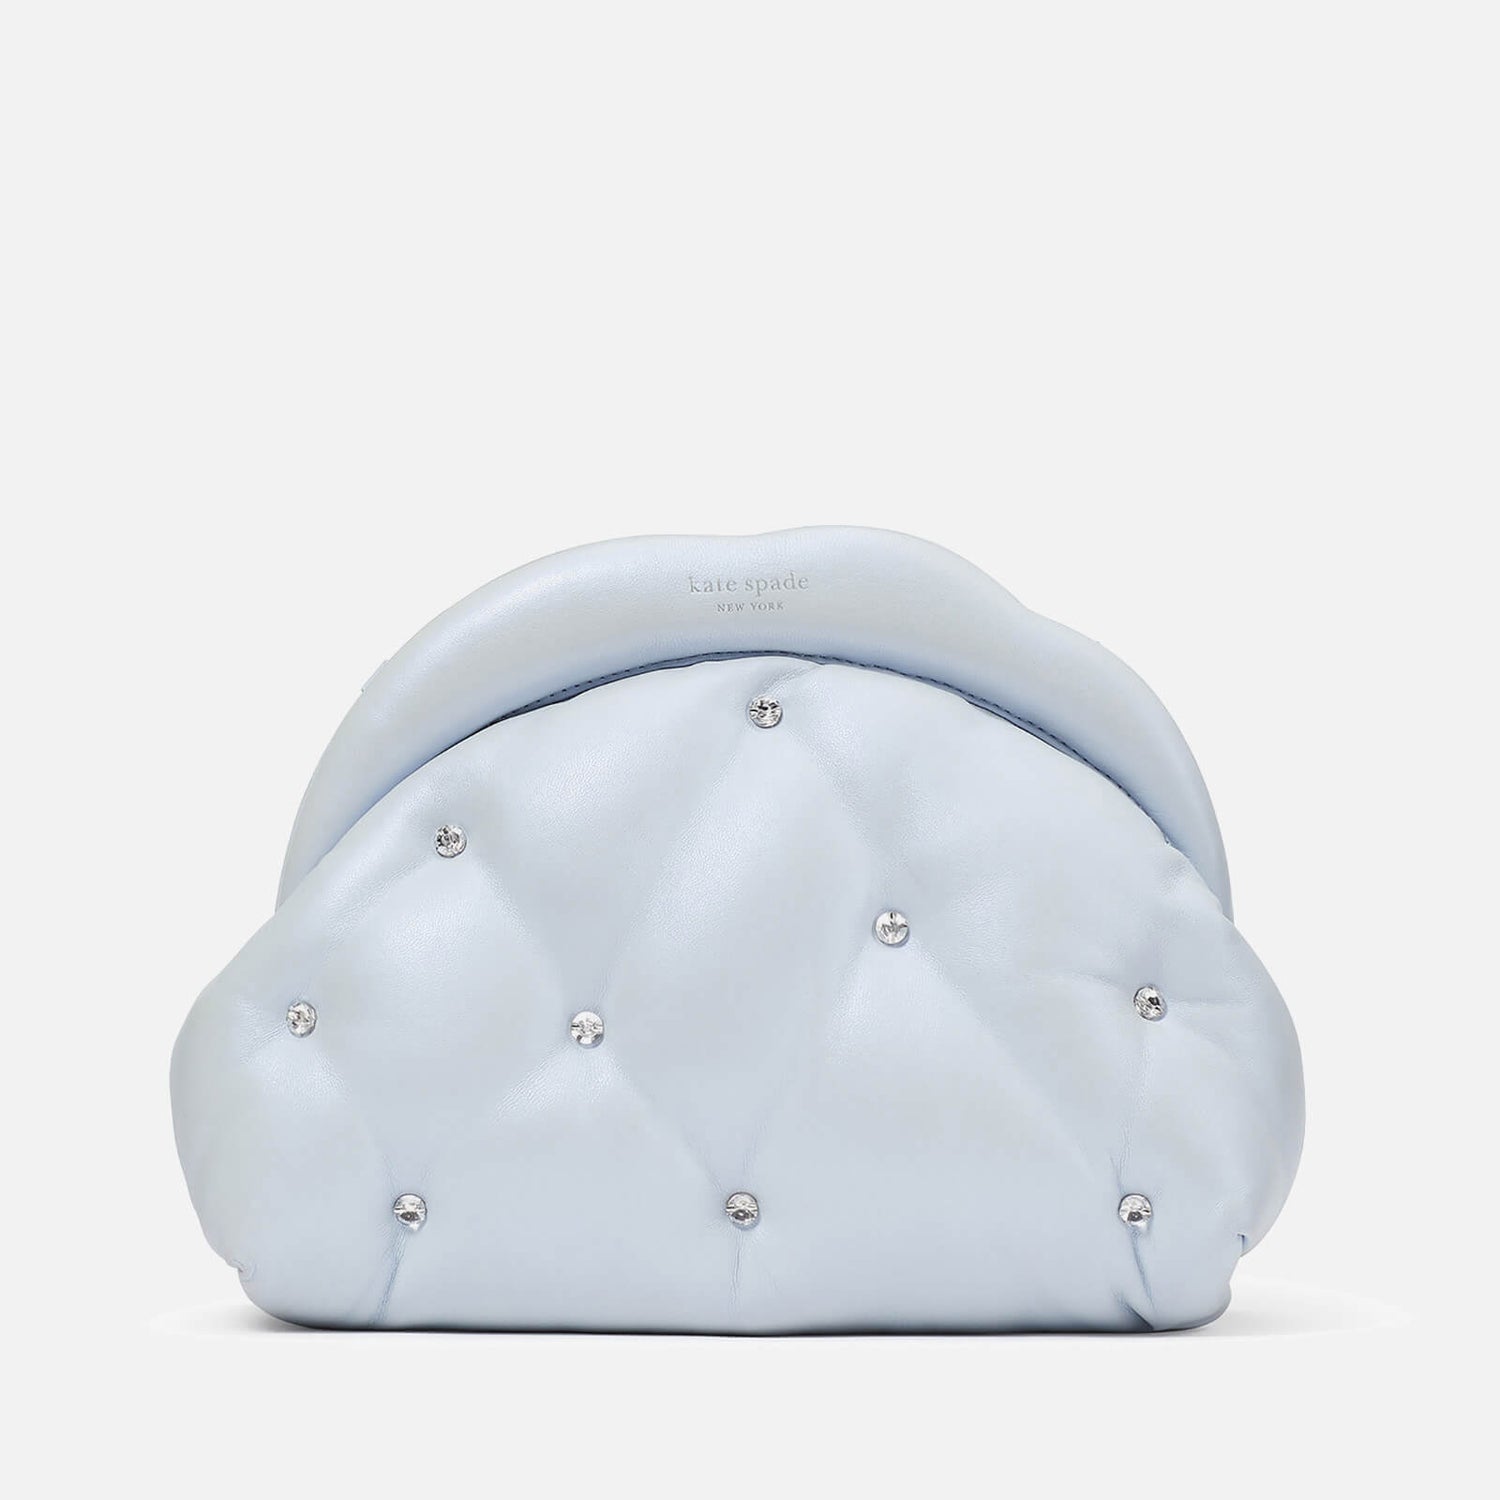 Kate Spade New York Shade Quilted Leather Cloud Clutch Bag